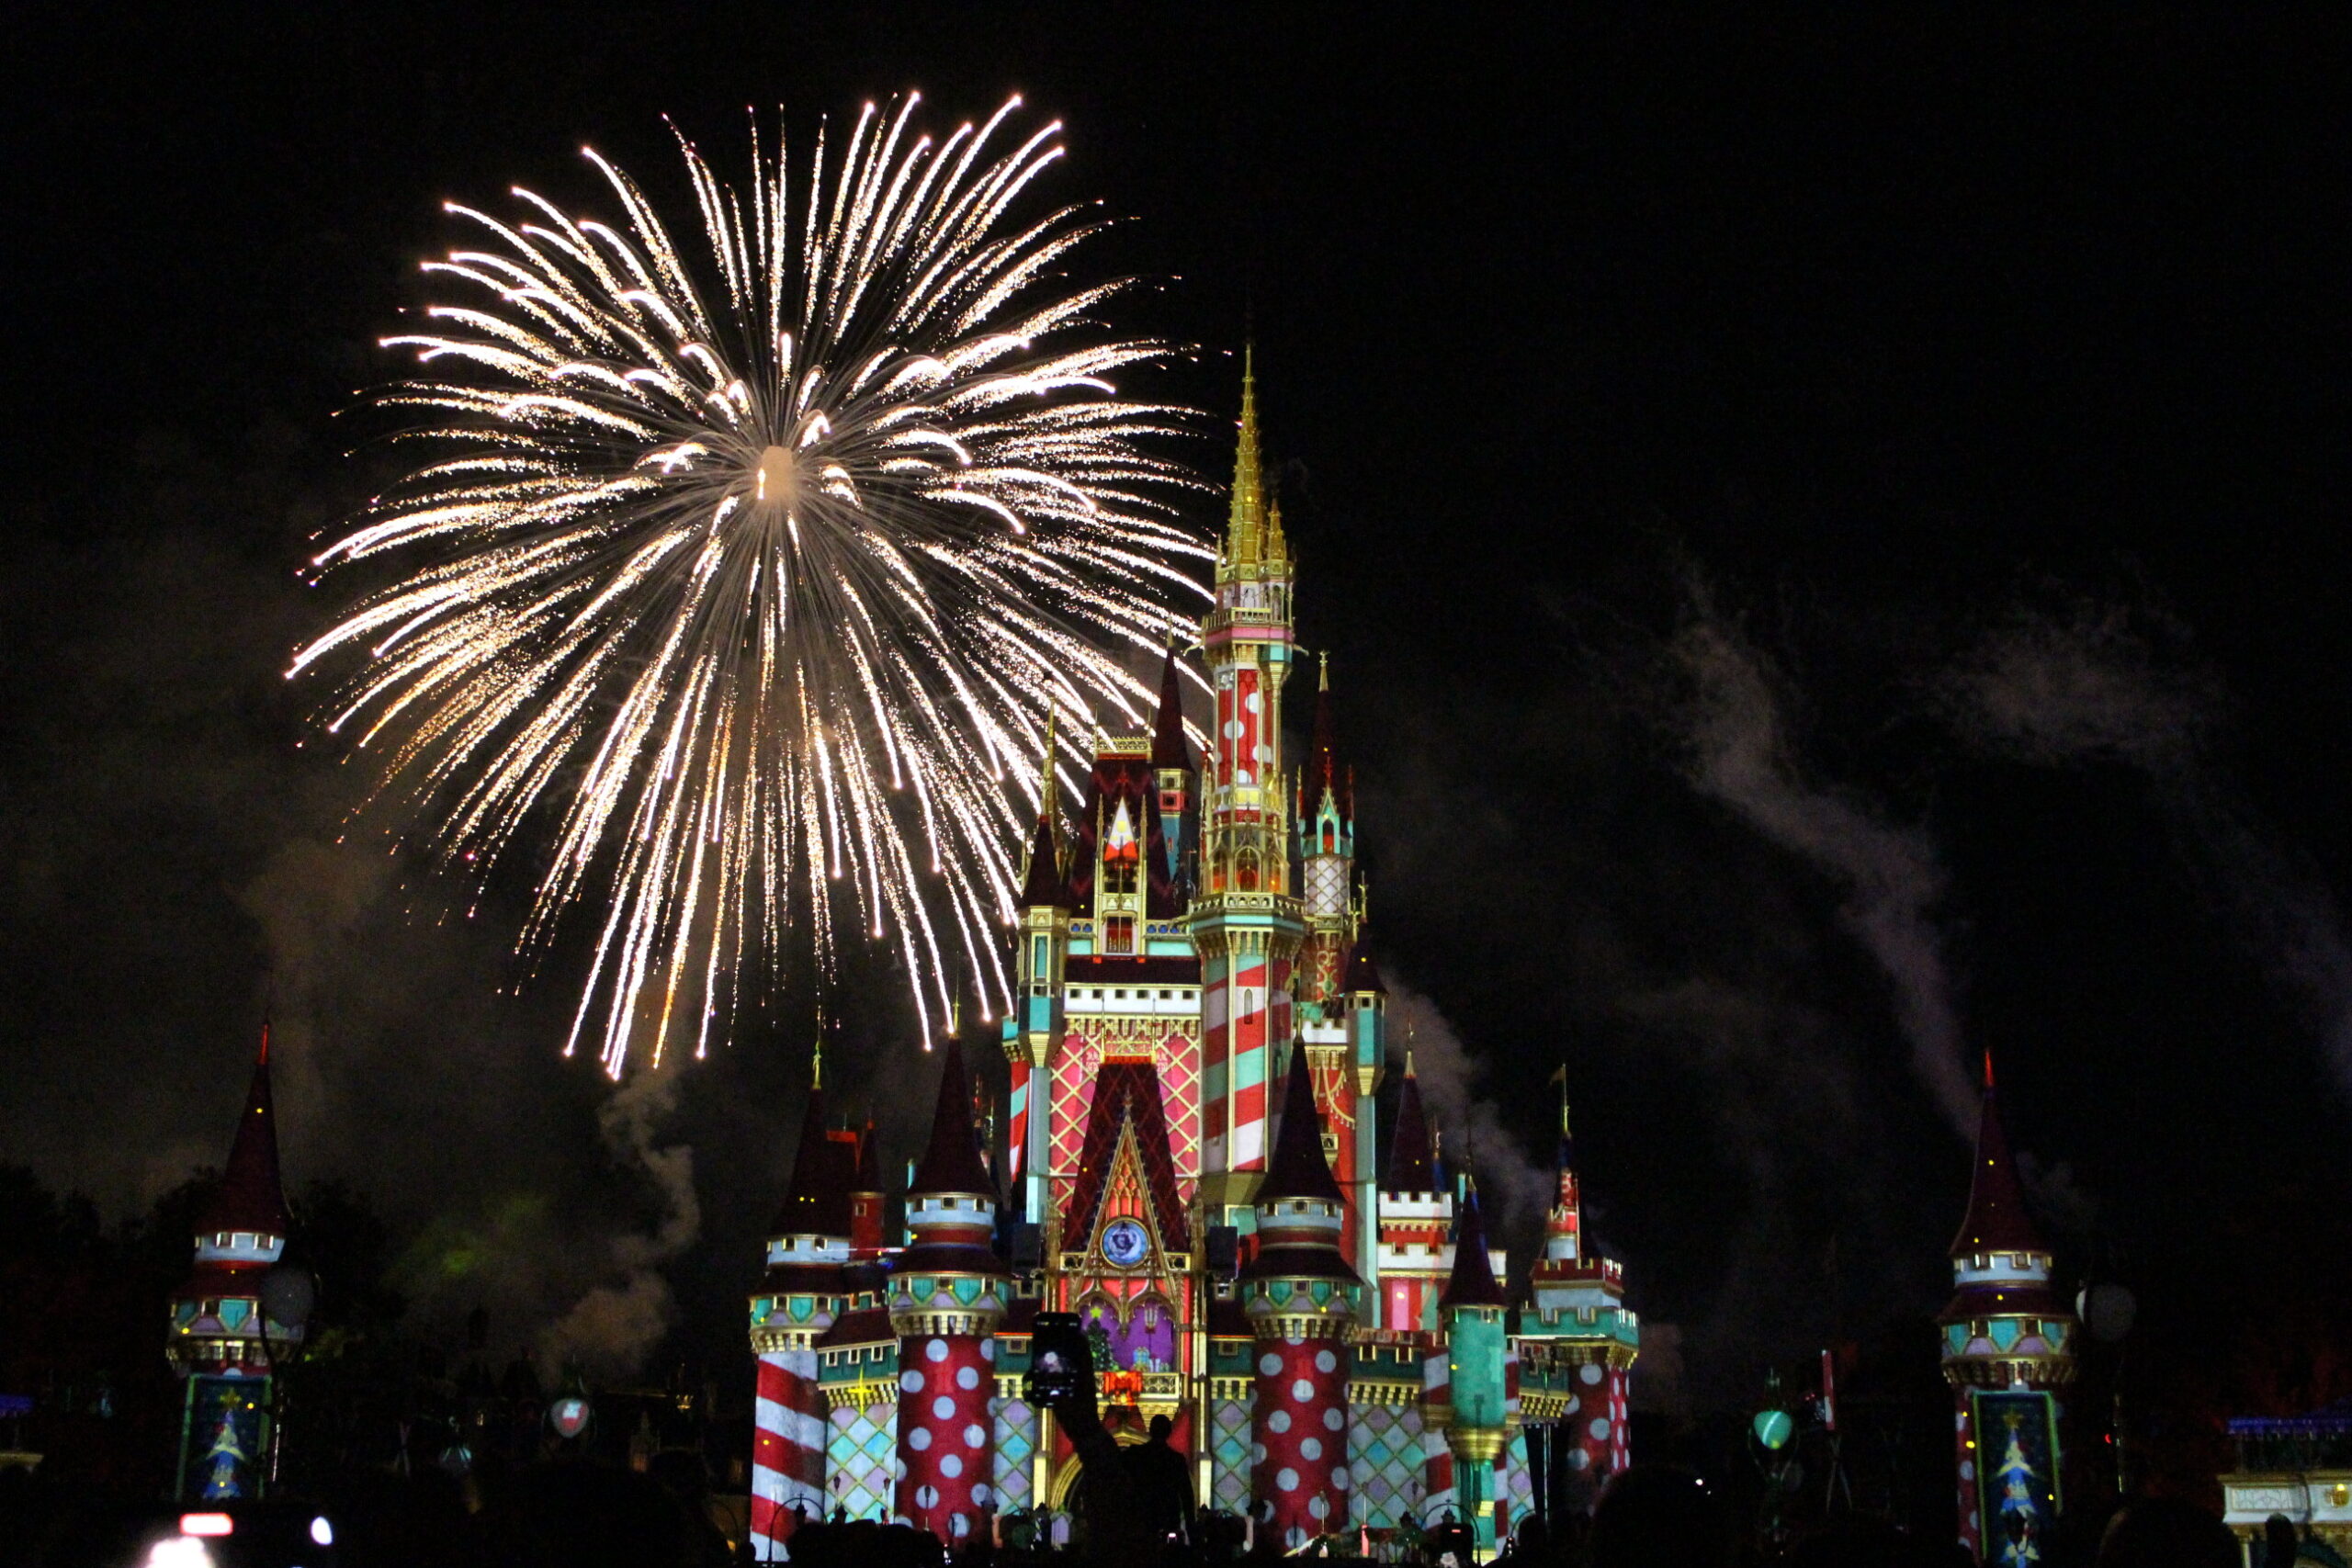 Fireworks over the Disney castle at Mickeys Very Merry Christmas Party